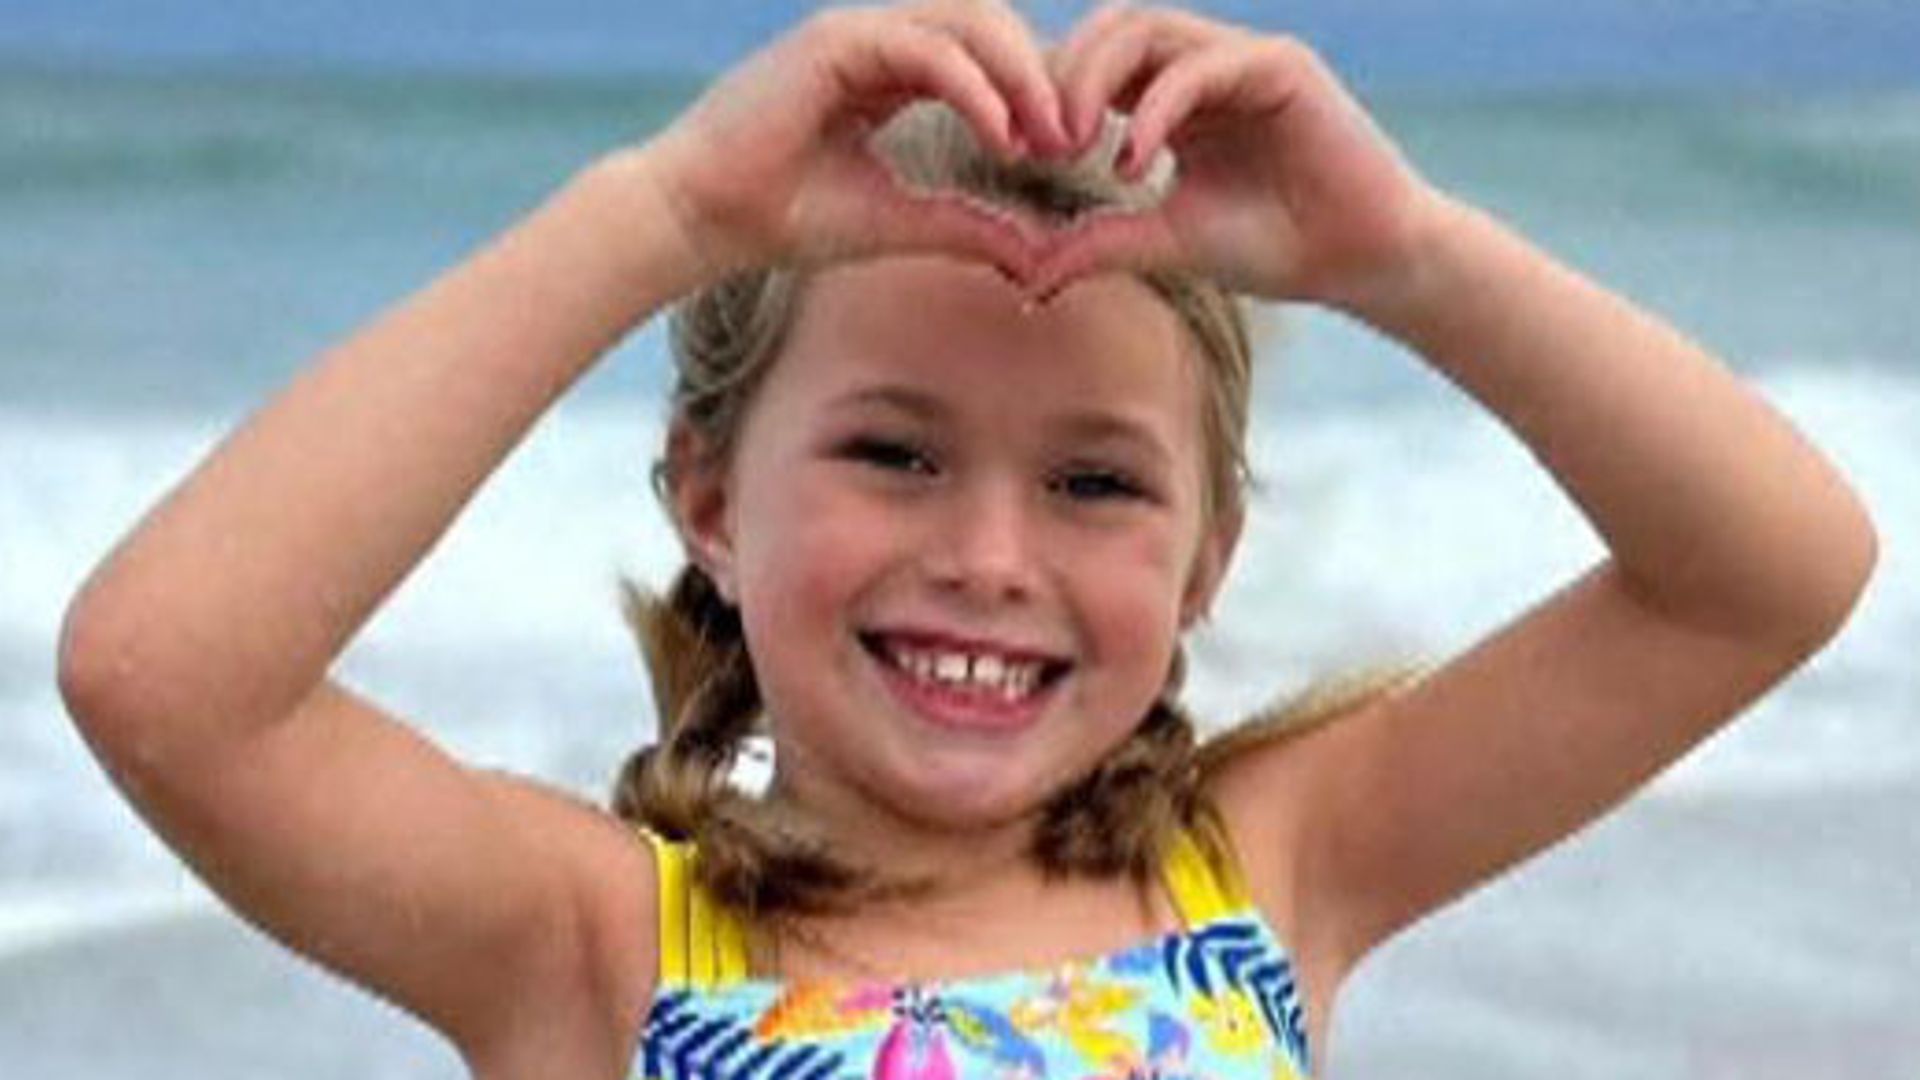 Parents of girl who died after being buried by sand set up campaign to prevent similar tragedies